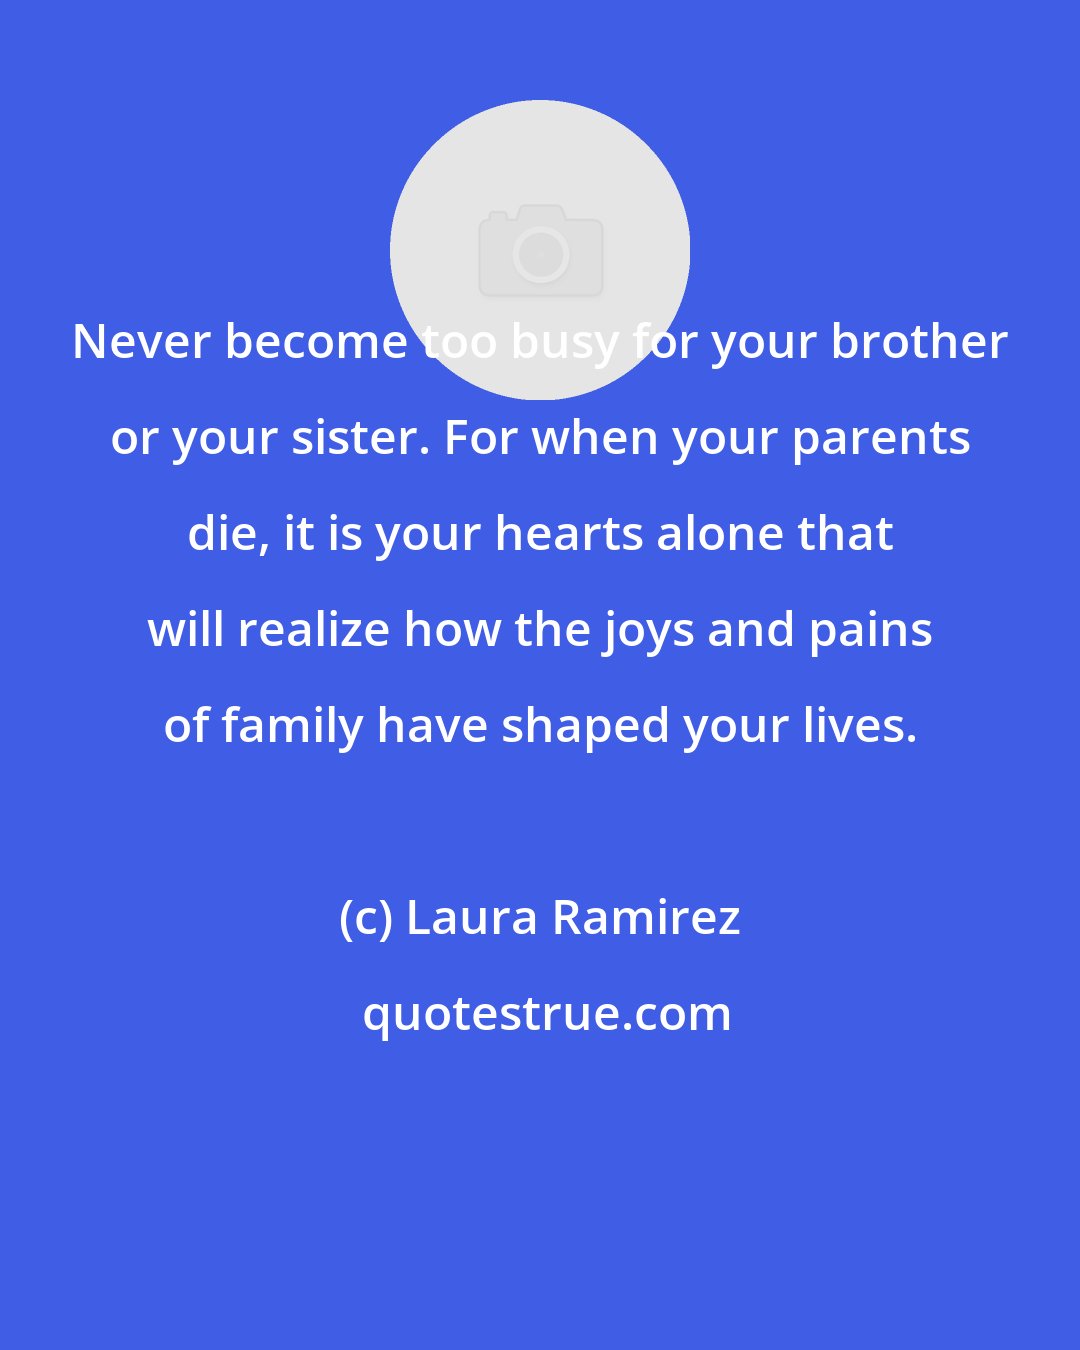 Laura Ramirez: Never become too busy for your brother or your sister. For when your parents die, it is your hearts alone that will realize how the joys and pains of family have shaped your lives.